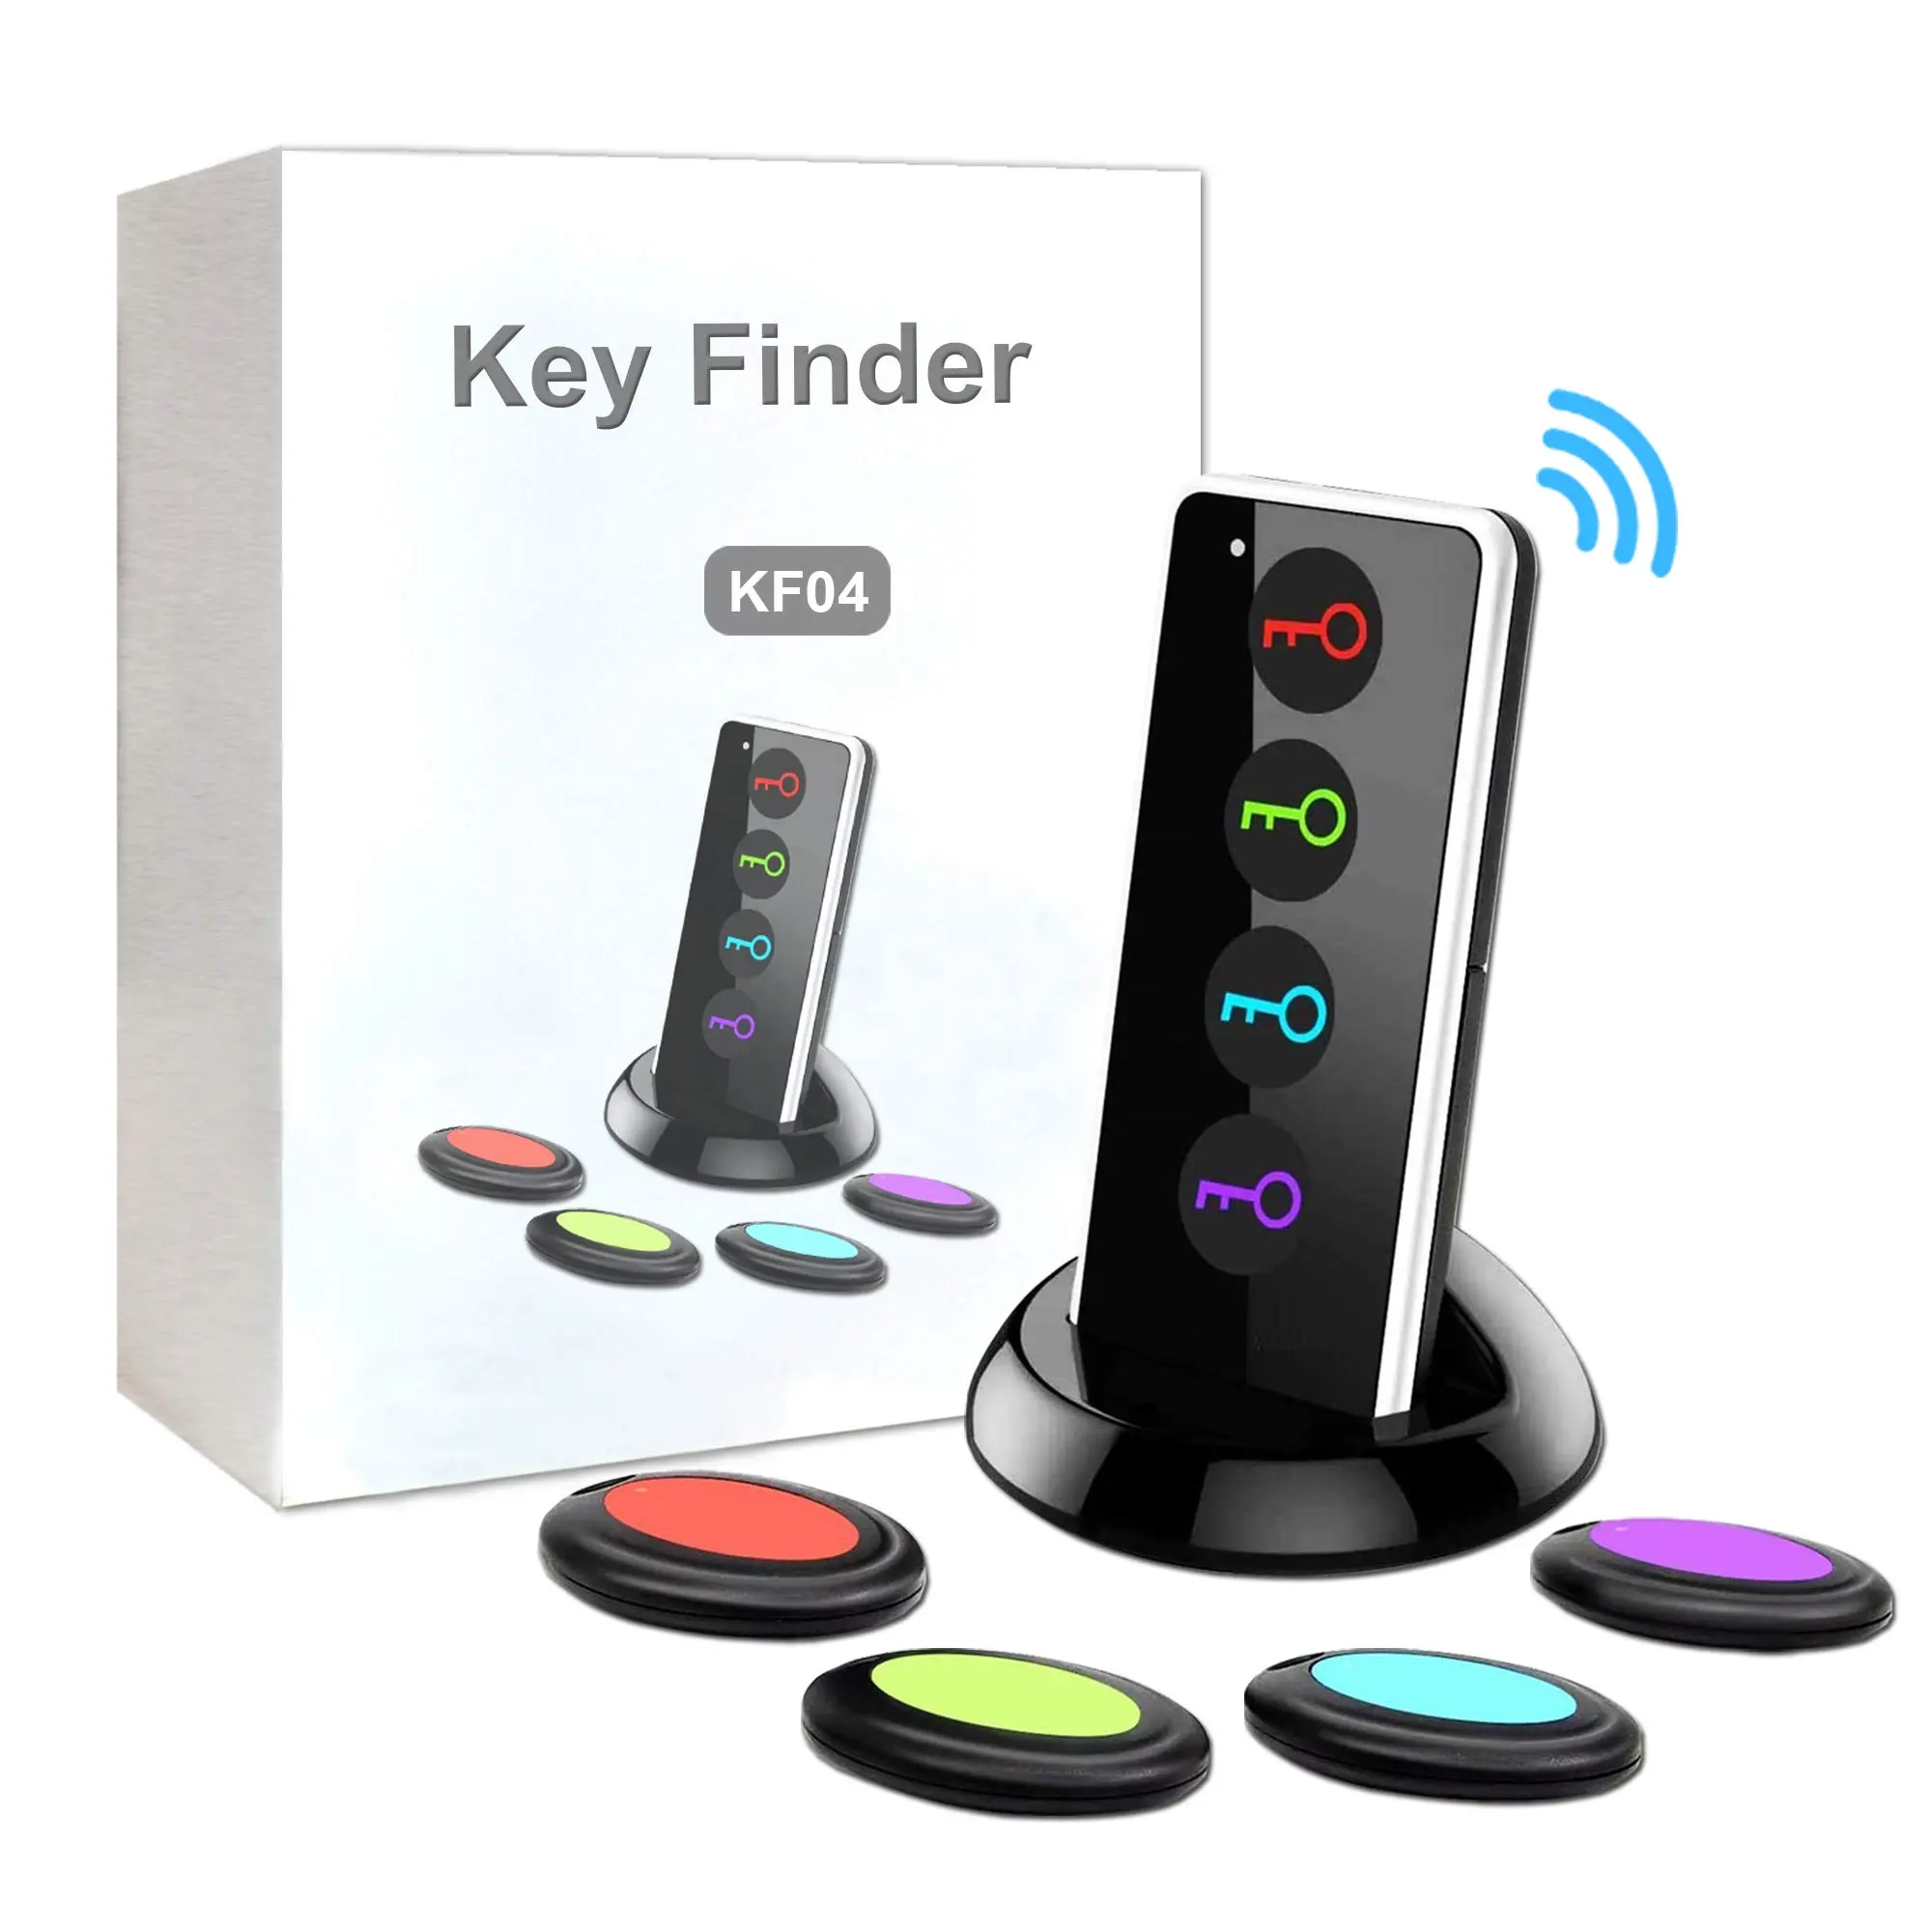 Smart Home Security Anti-Lost-Alarm kettens chl üssel <span class=keywords><strong>GPS</strong></span> Wireless Key Finder Tracker